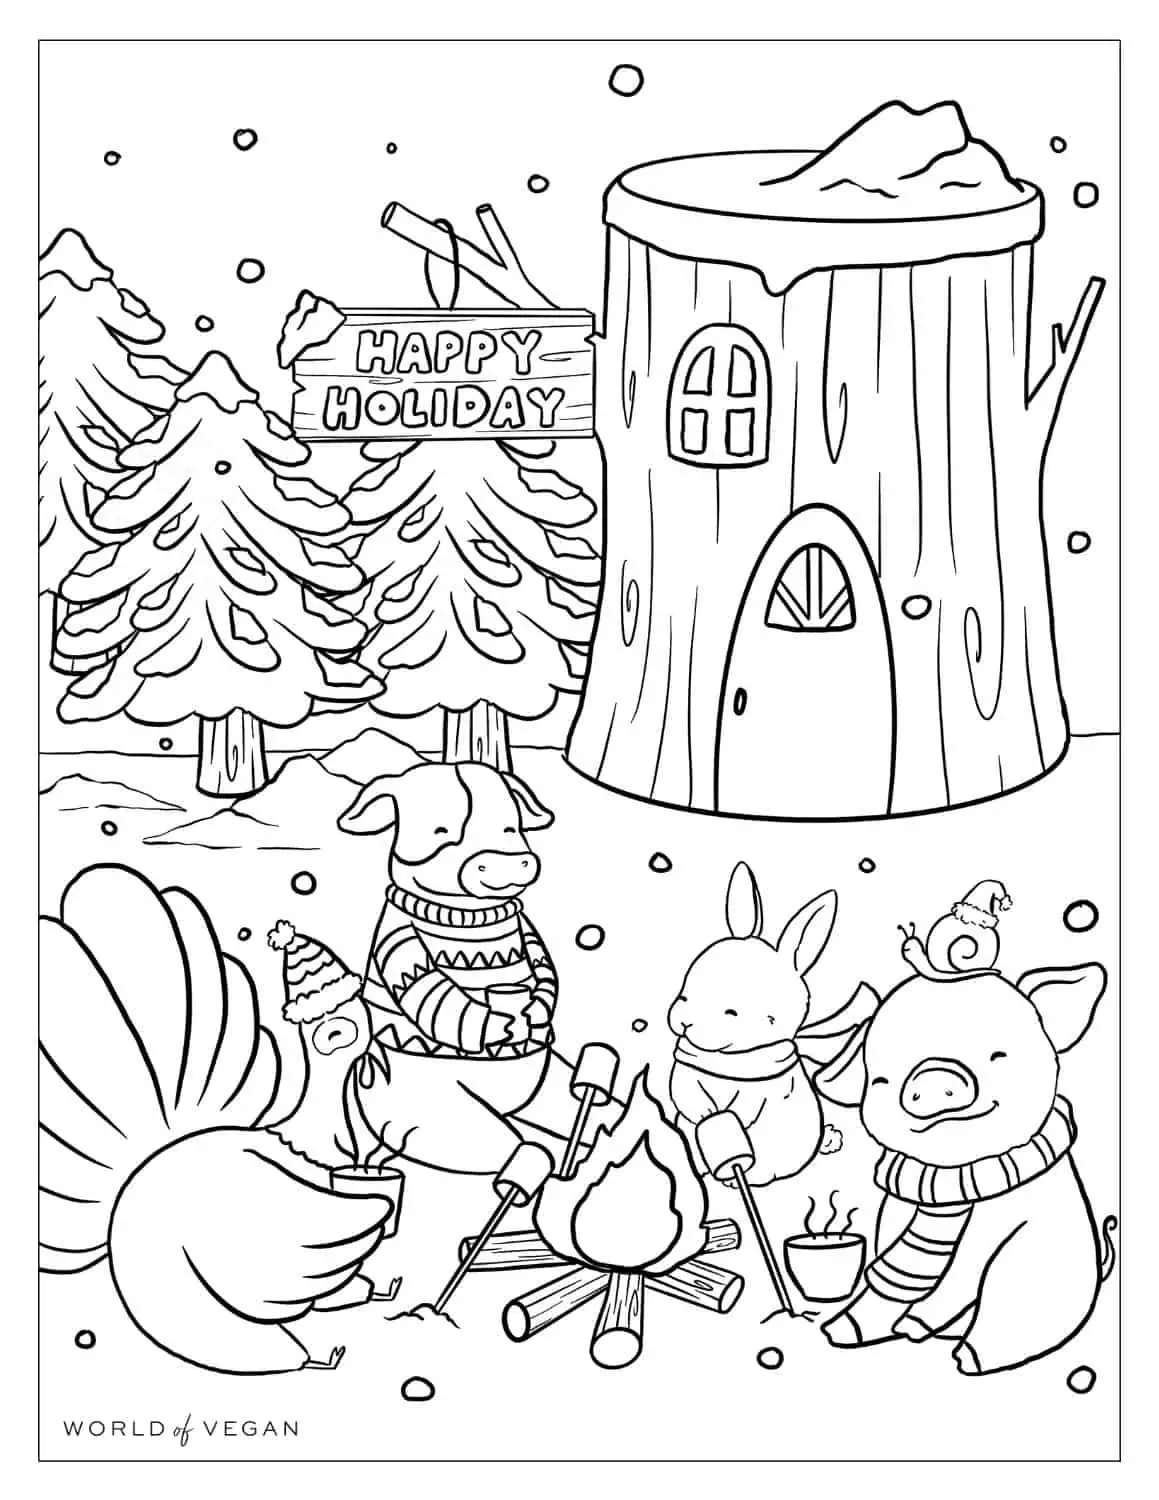 Woodland animals gathered around a snowy fire in a woodland scene with a pig, cow, turkey, and bunny and a happy holiday sign. 